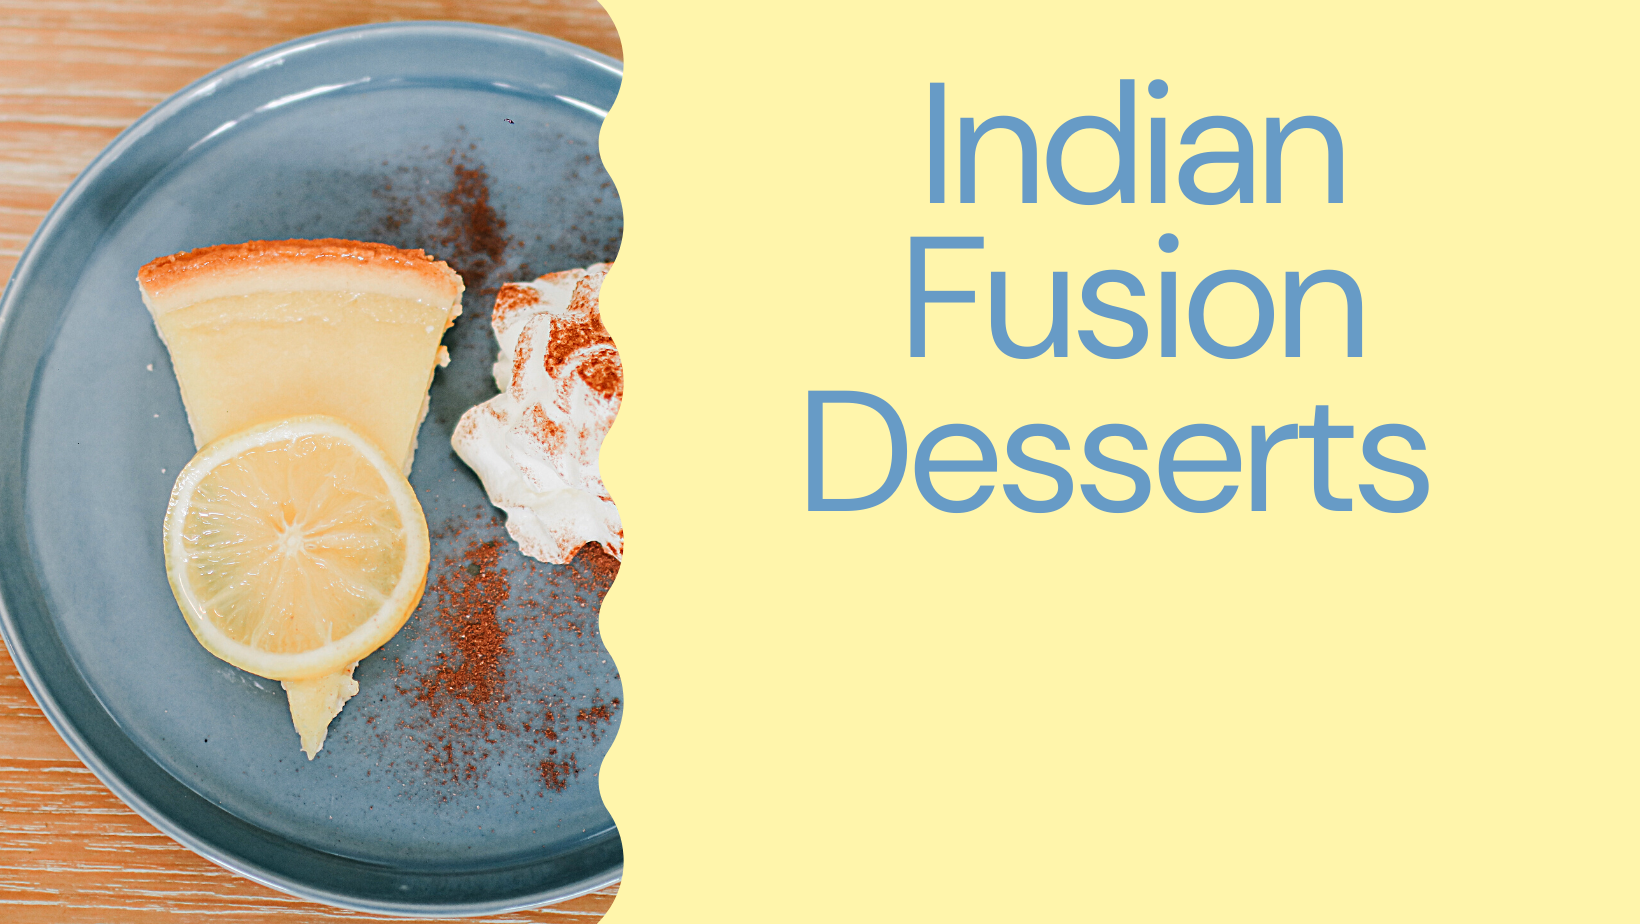 Top 8 Delicious Indian Fusion Desserts for This Christmas Holidays!